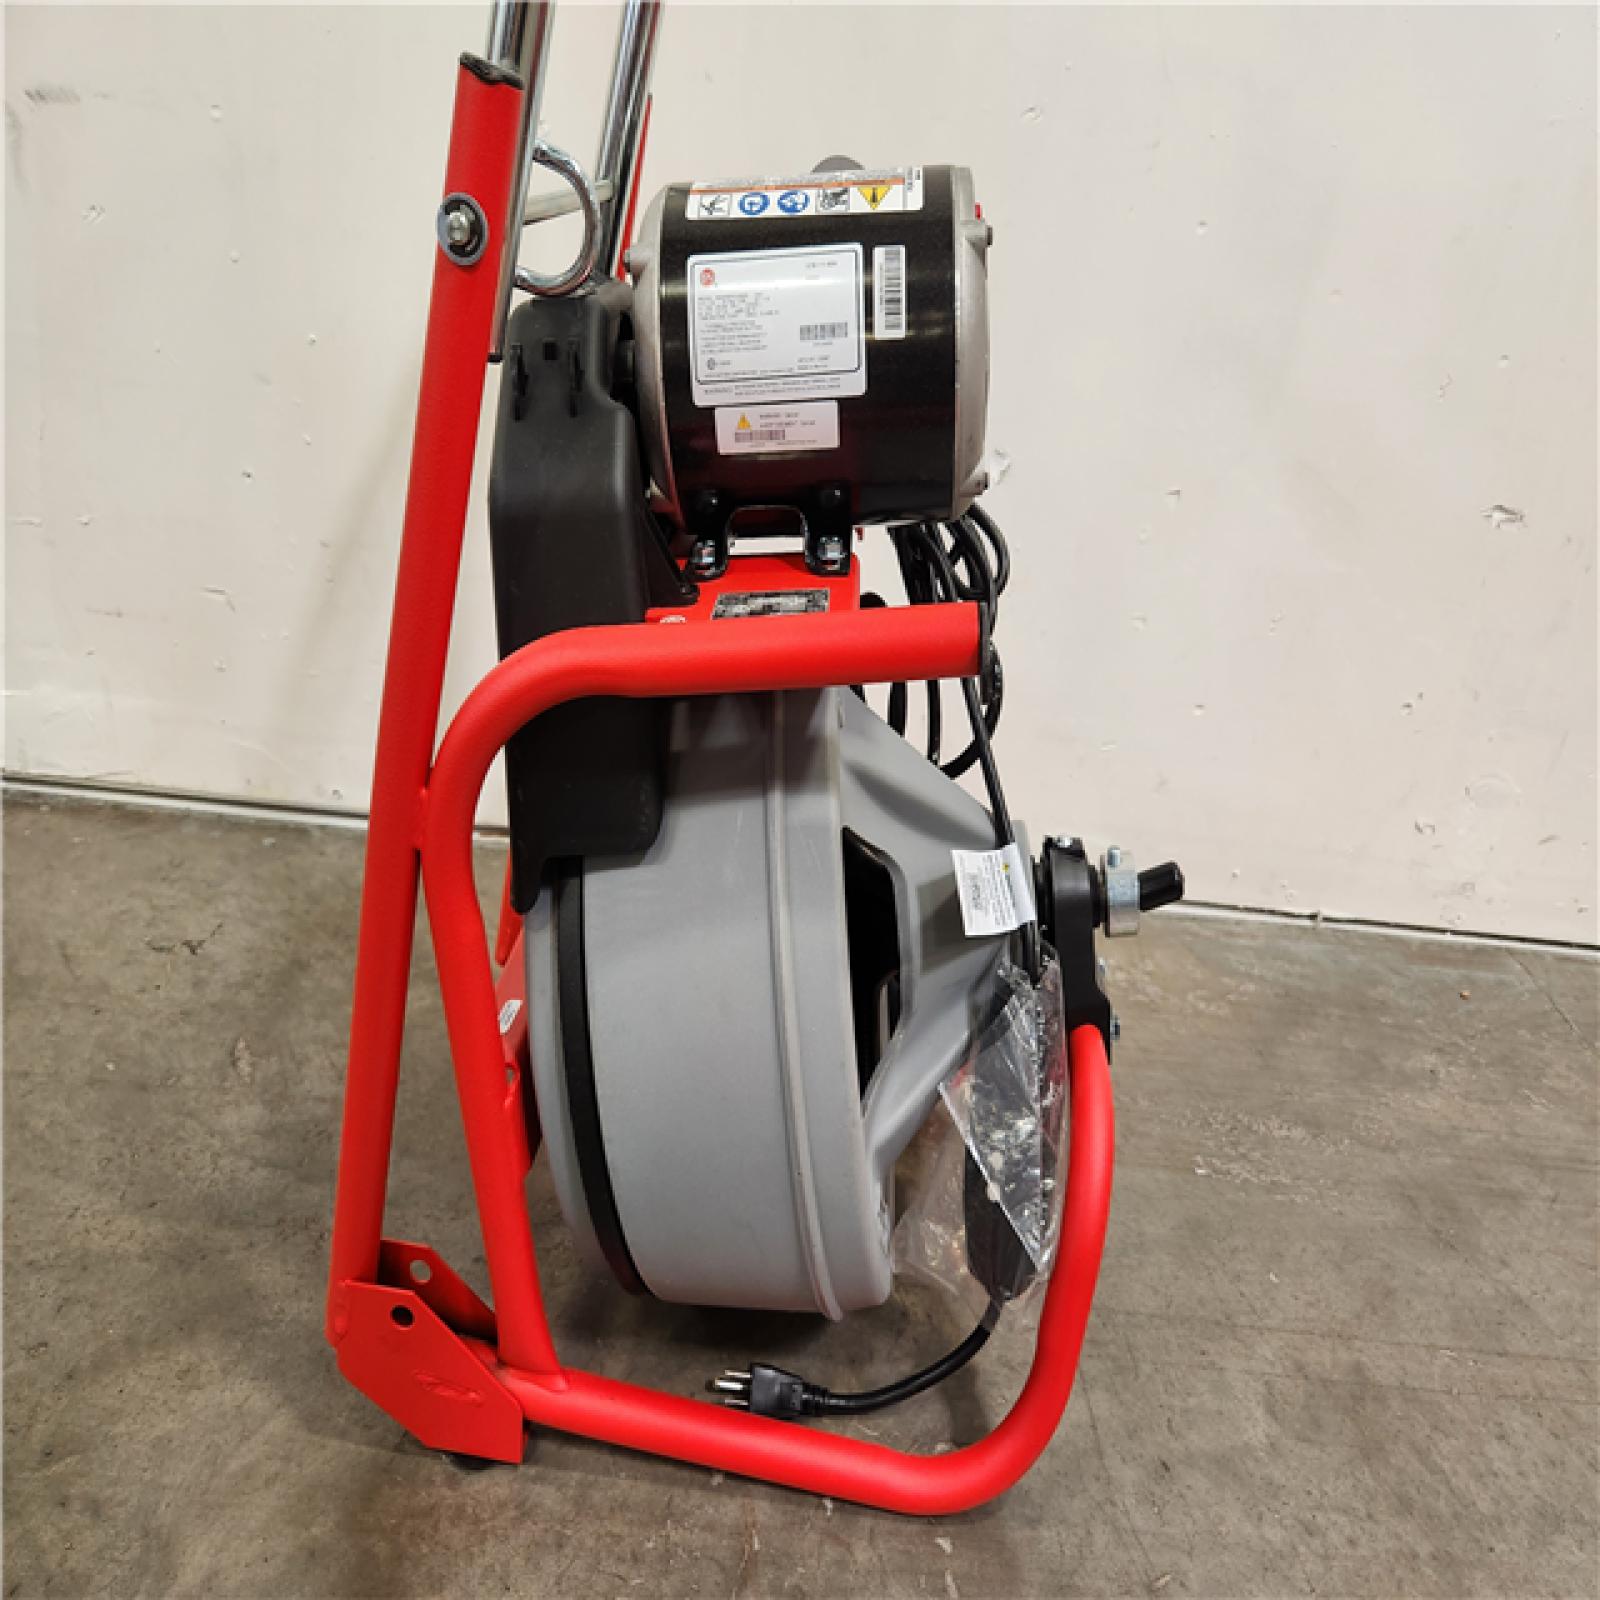 Phoenix Location NEW RIDGID K-400 Drain Cleaning Snake Auger 120-Volt Drum Machine with C-32IW 3/8 in. x 75 ft. Cable + RIDGID Autofeed Accessory Add On/Replacement for K-400 Drain Cleaning Snake Auger Machine, Automatically Feeds Cable In/Out